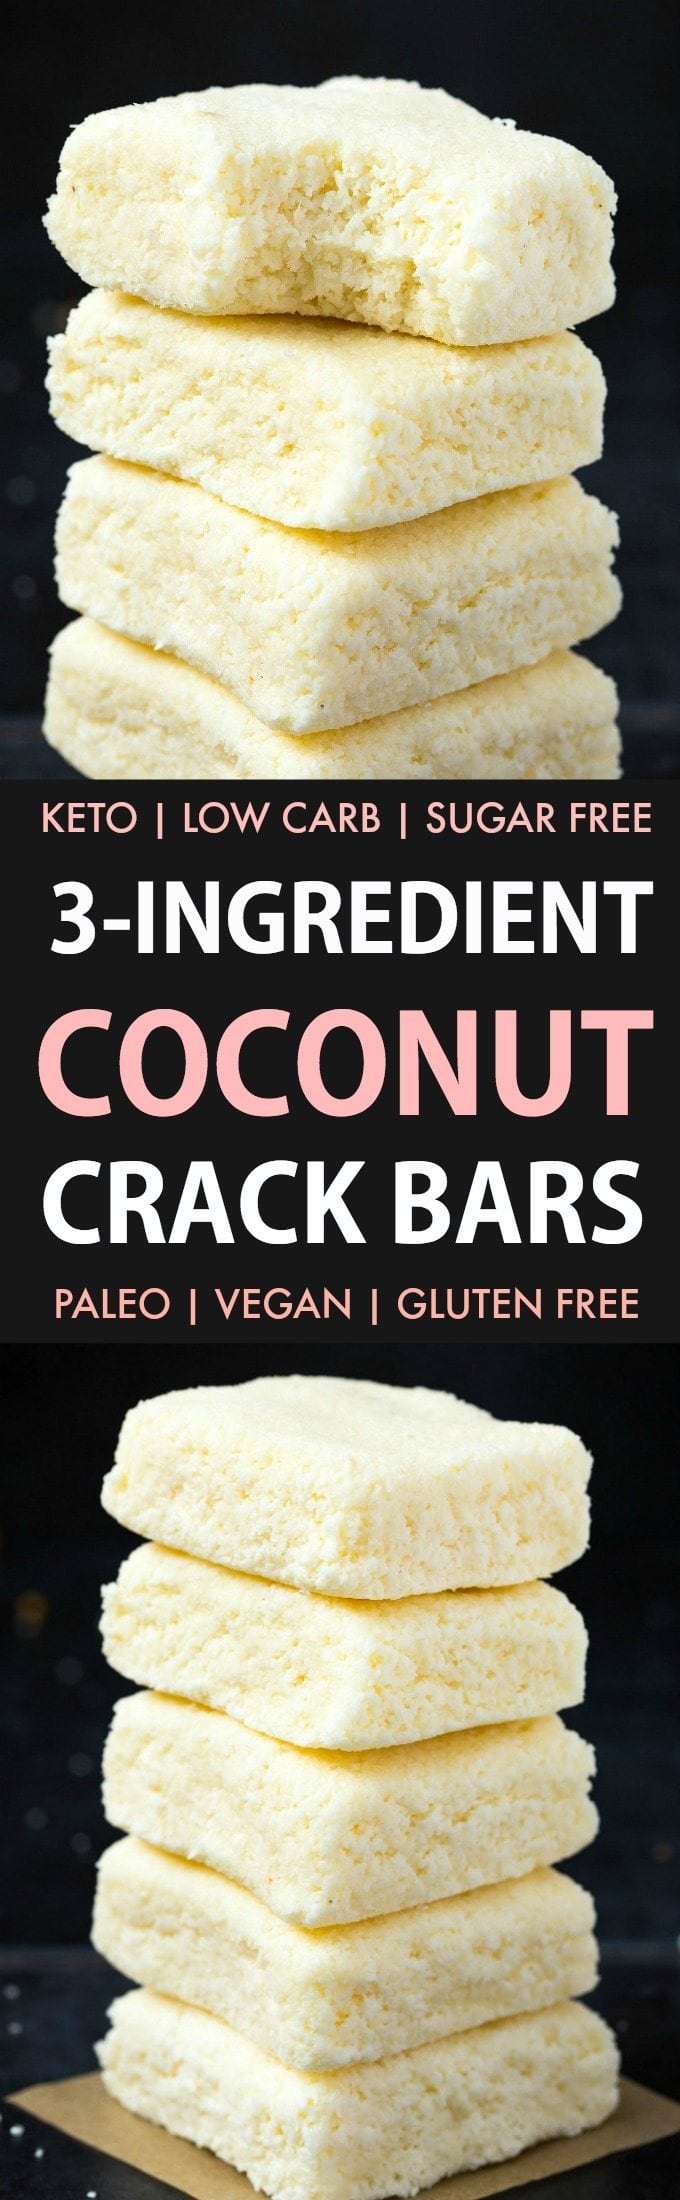 3-Ingredient No Bake Coconut Crack Bars in a collage